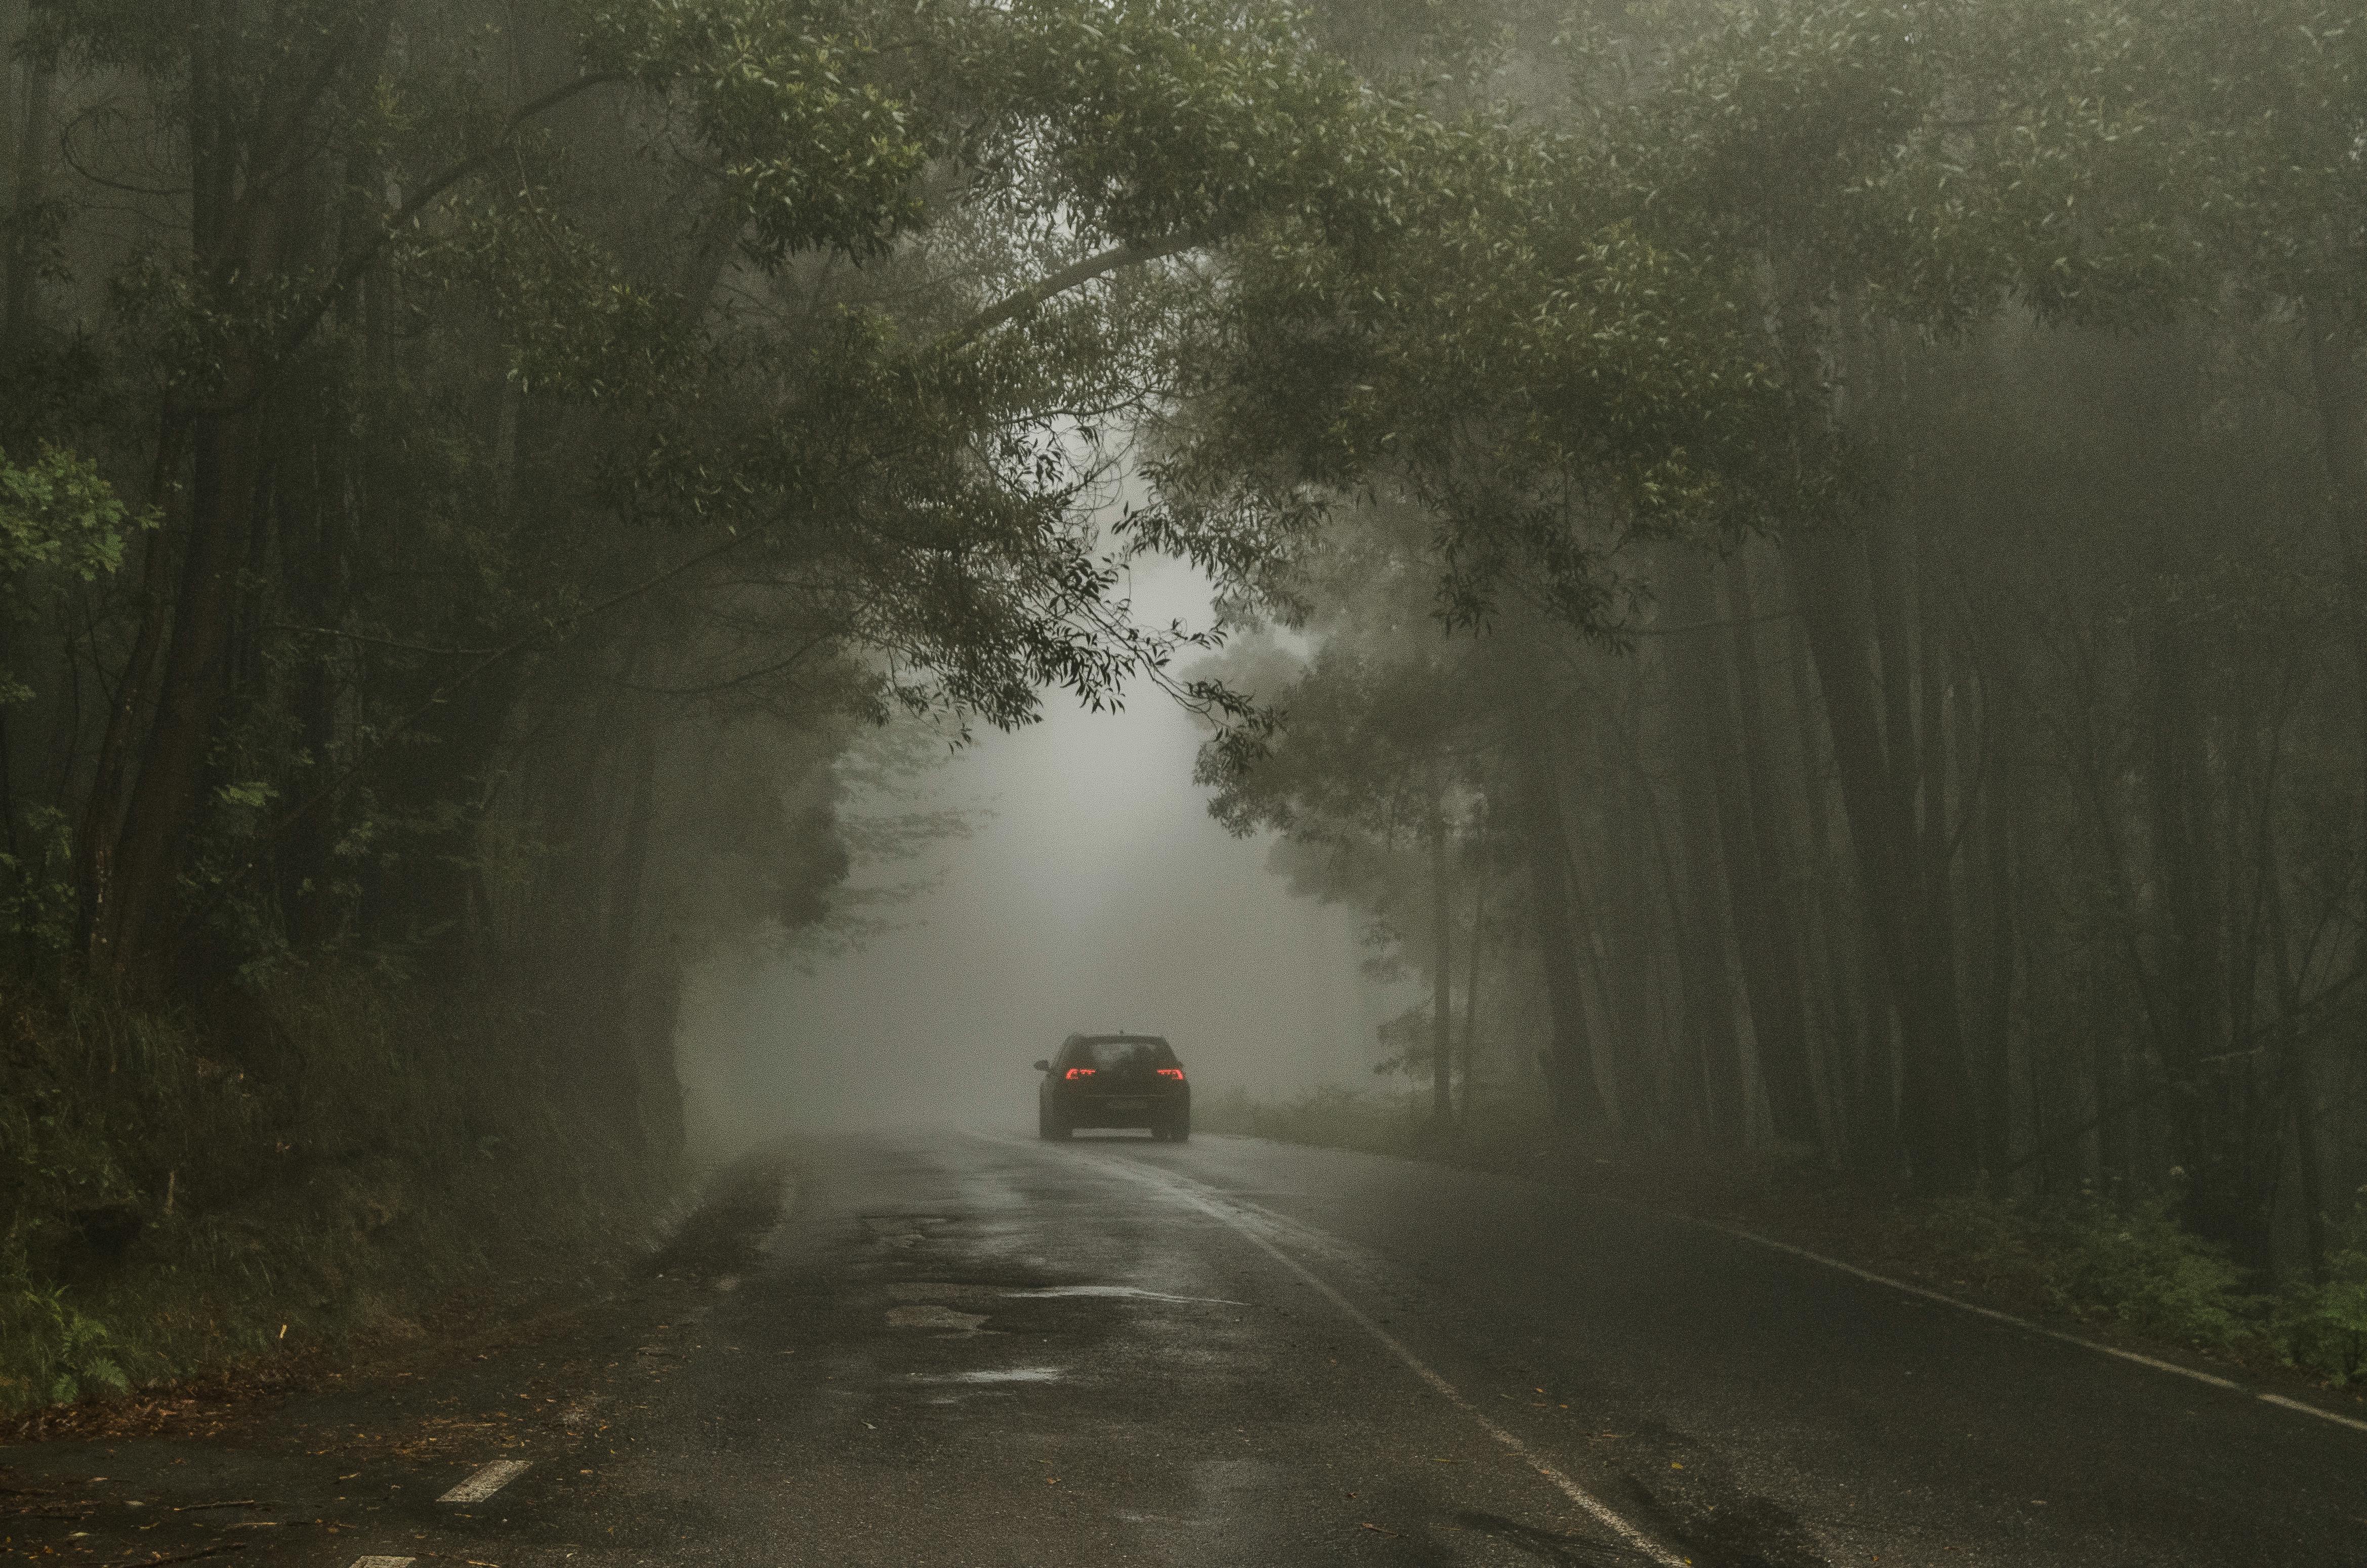 Car driving through the stormy forest | Source: Pexels